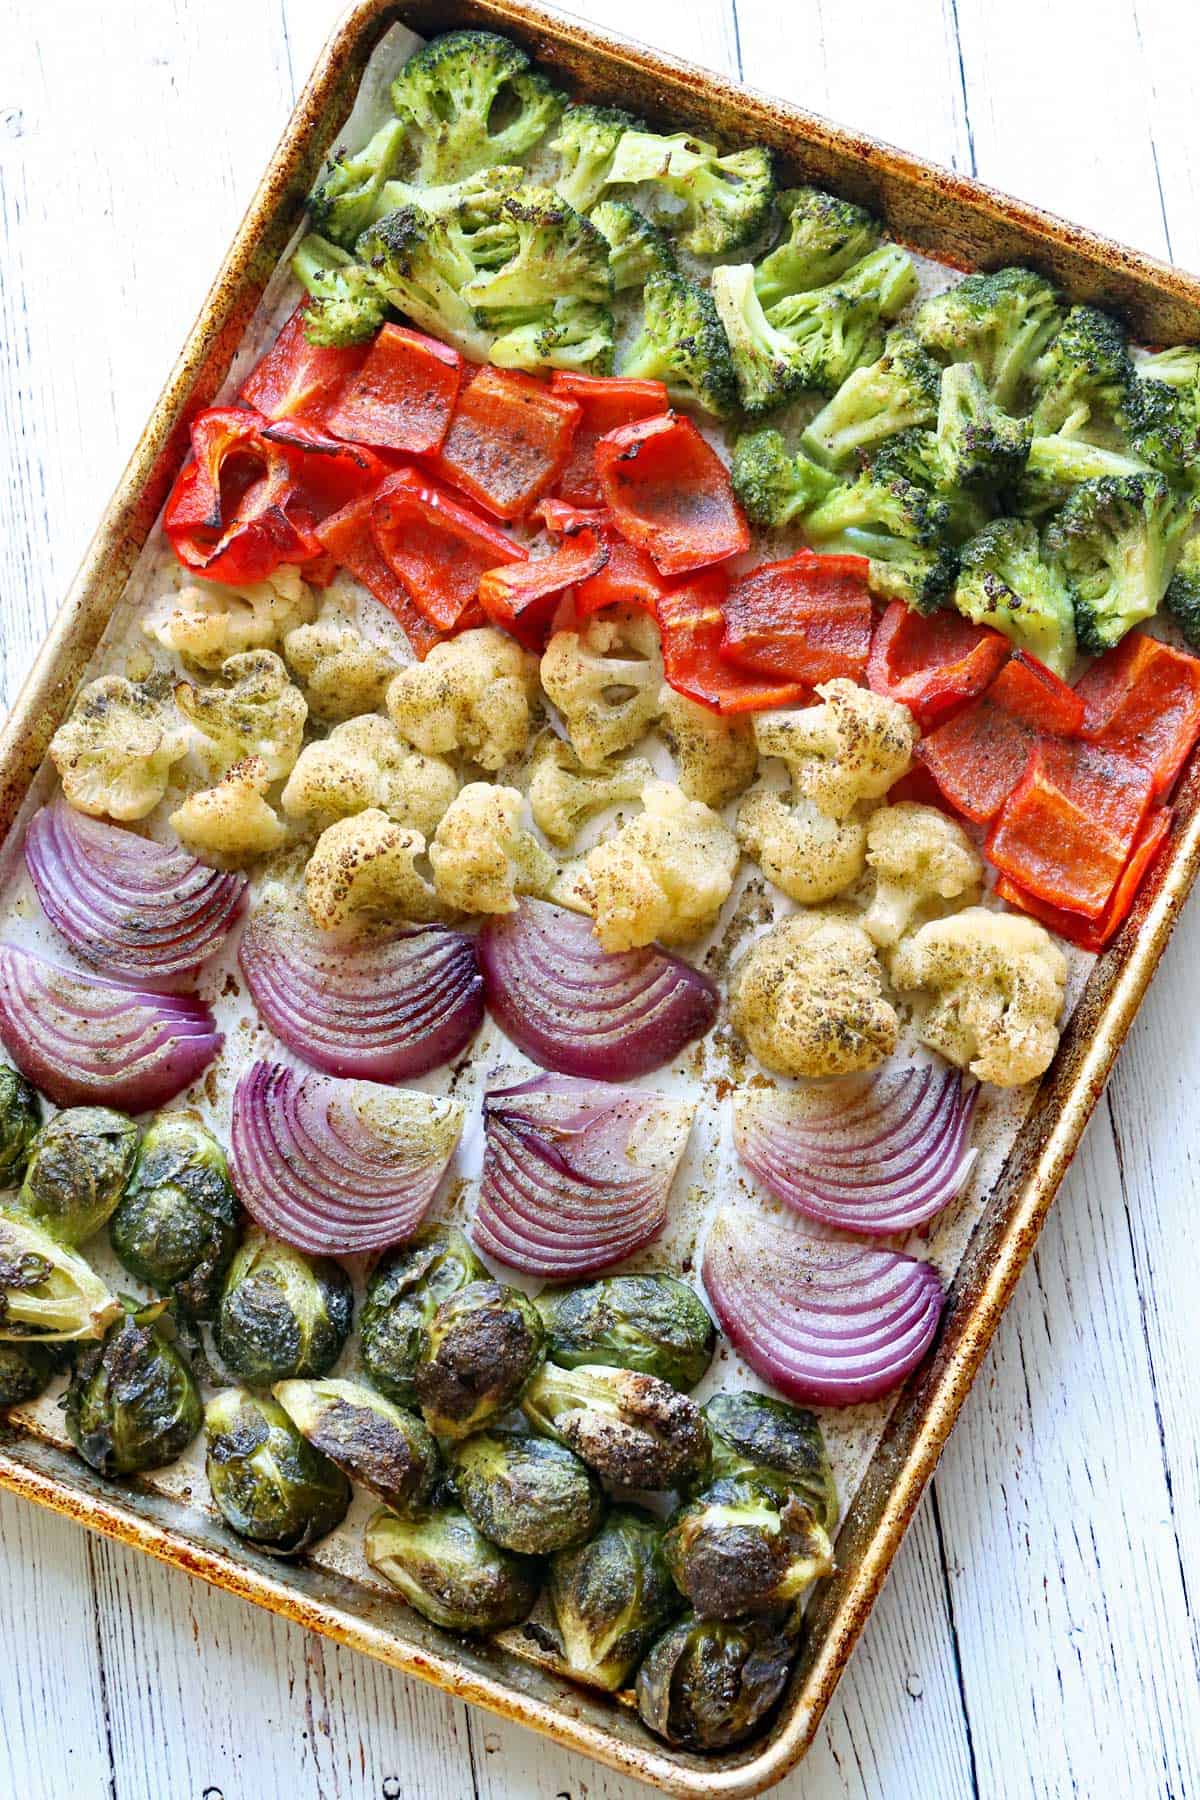 Oven-roasted vegetables on a baking dish.